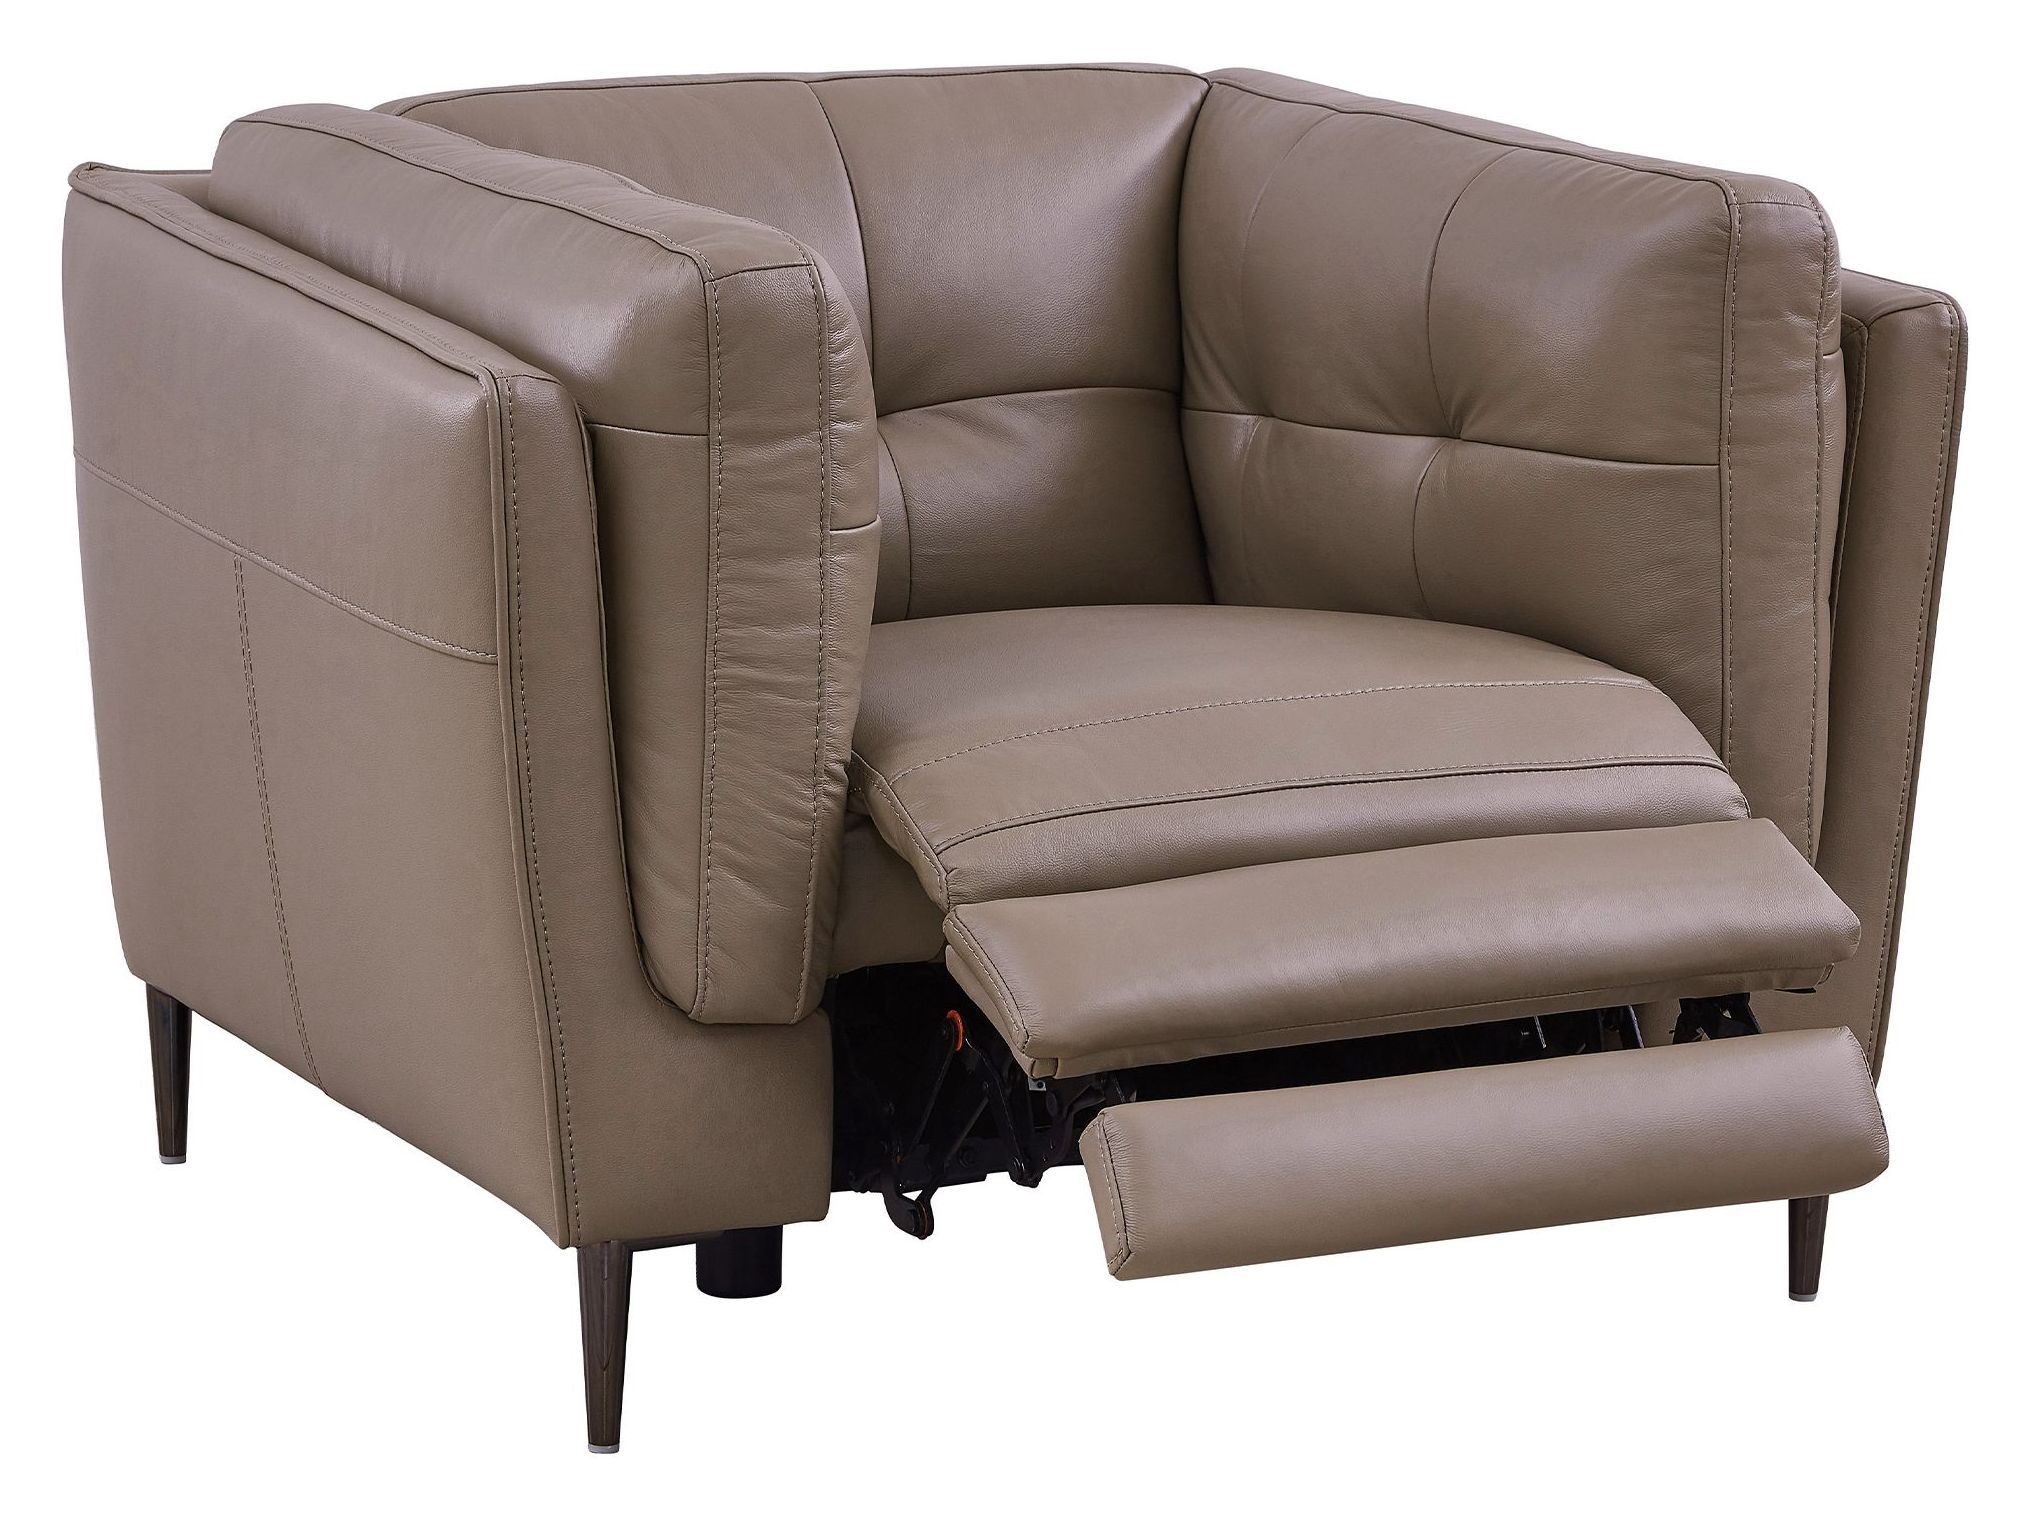 greige leather reclining sofa